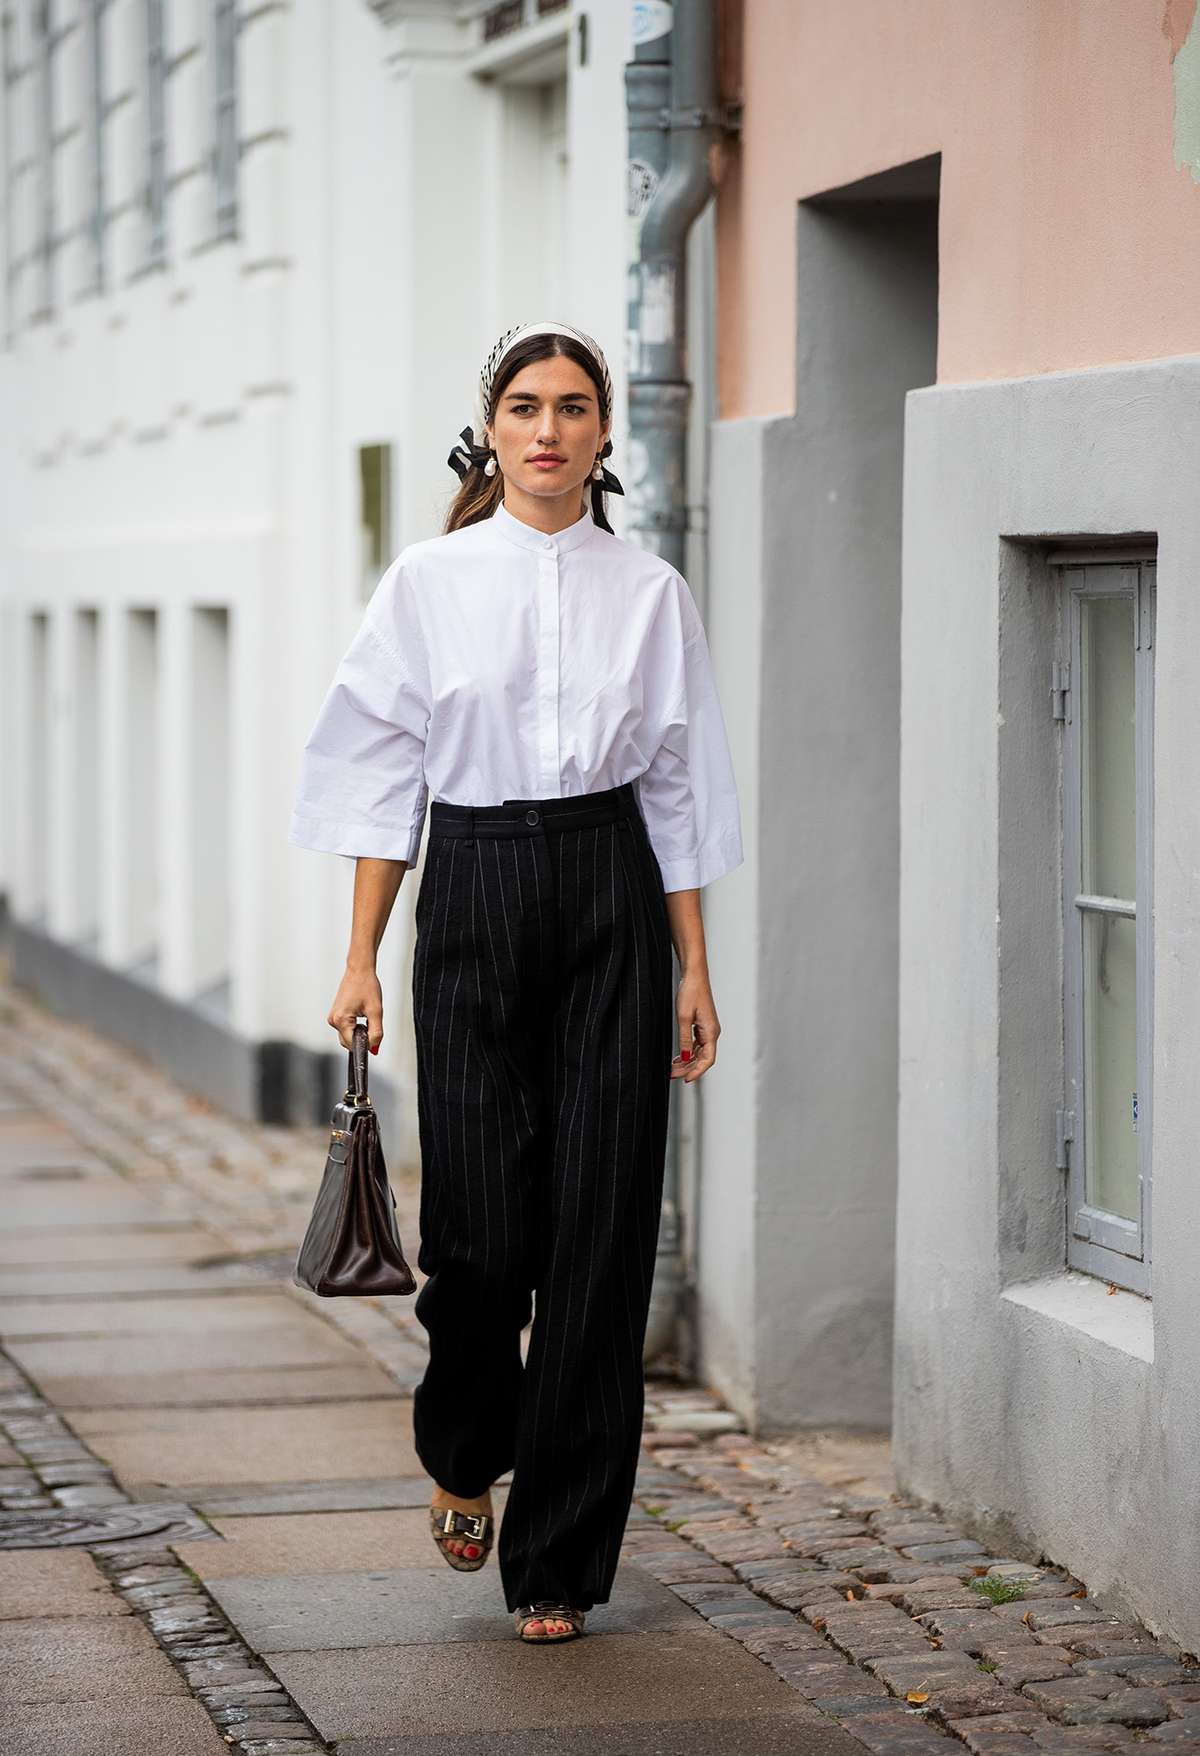 Copenhagen Fashion Week Just Gave Us a Month’s Worth of New Outfit Ideas